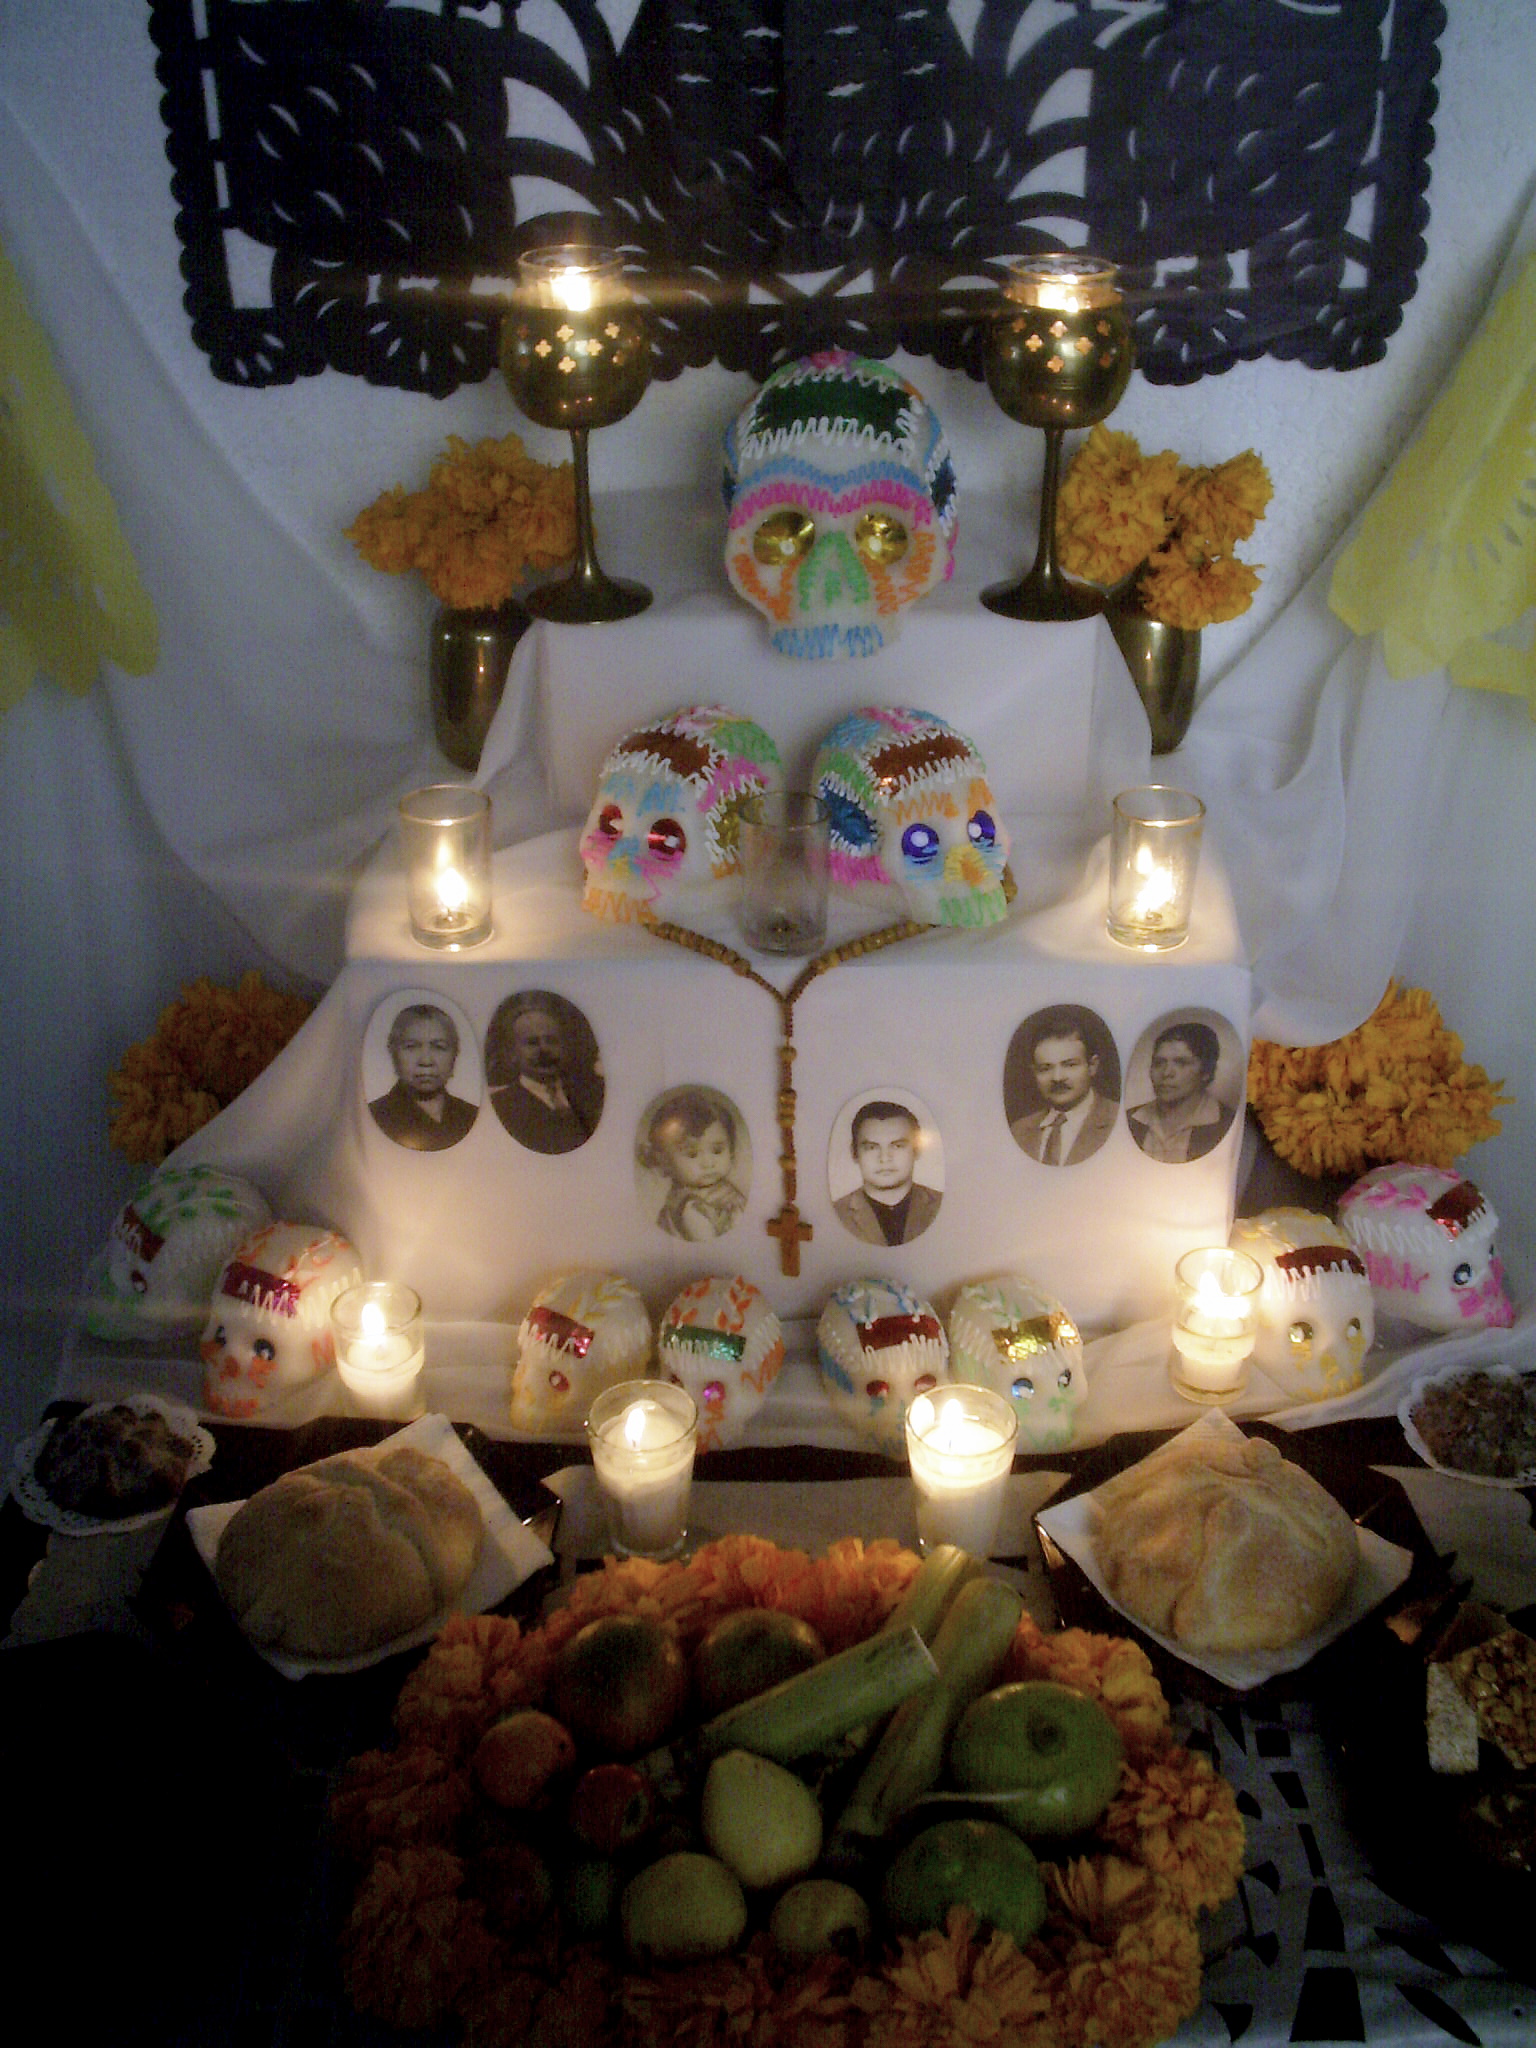 a dessert display with candles and a wall hanging